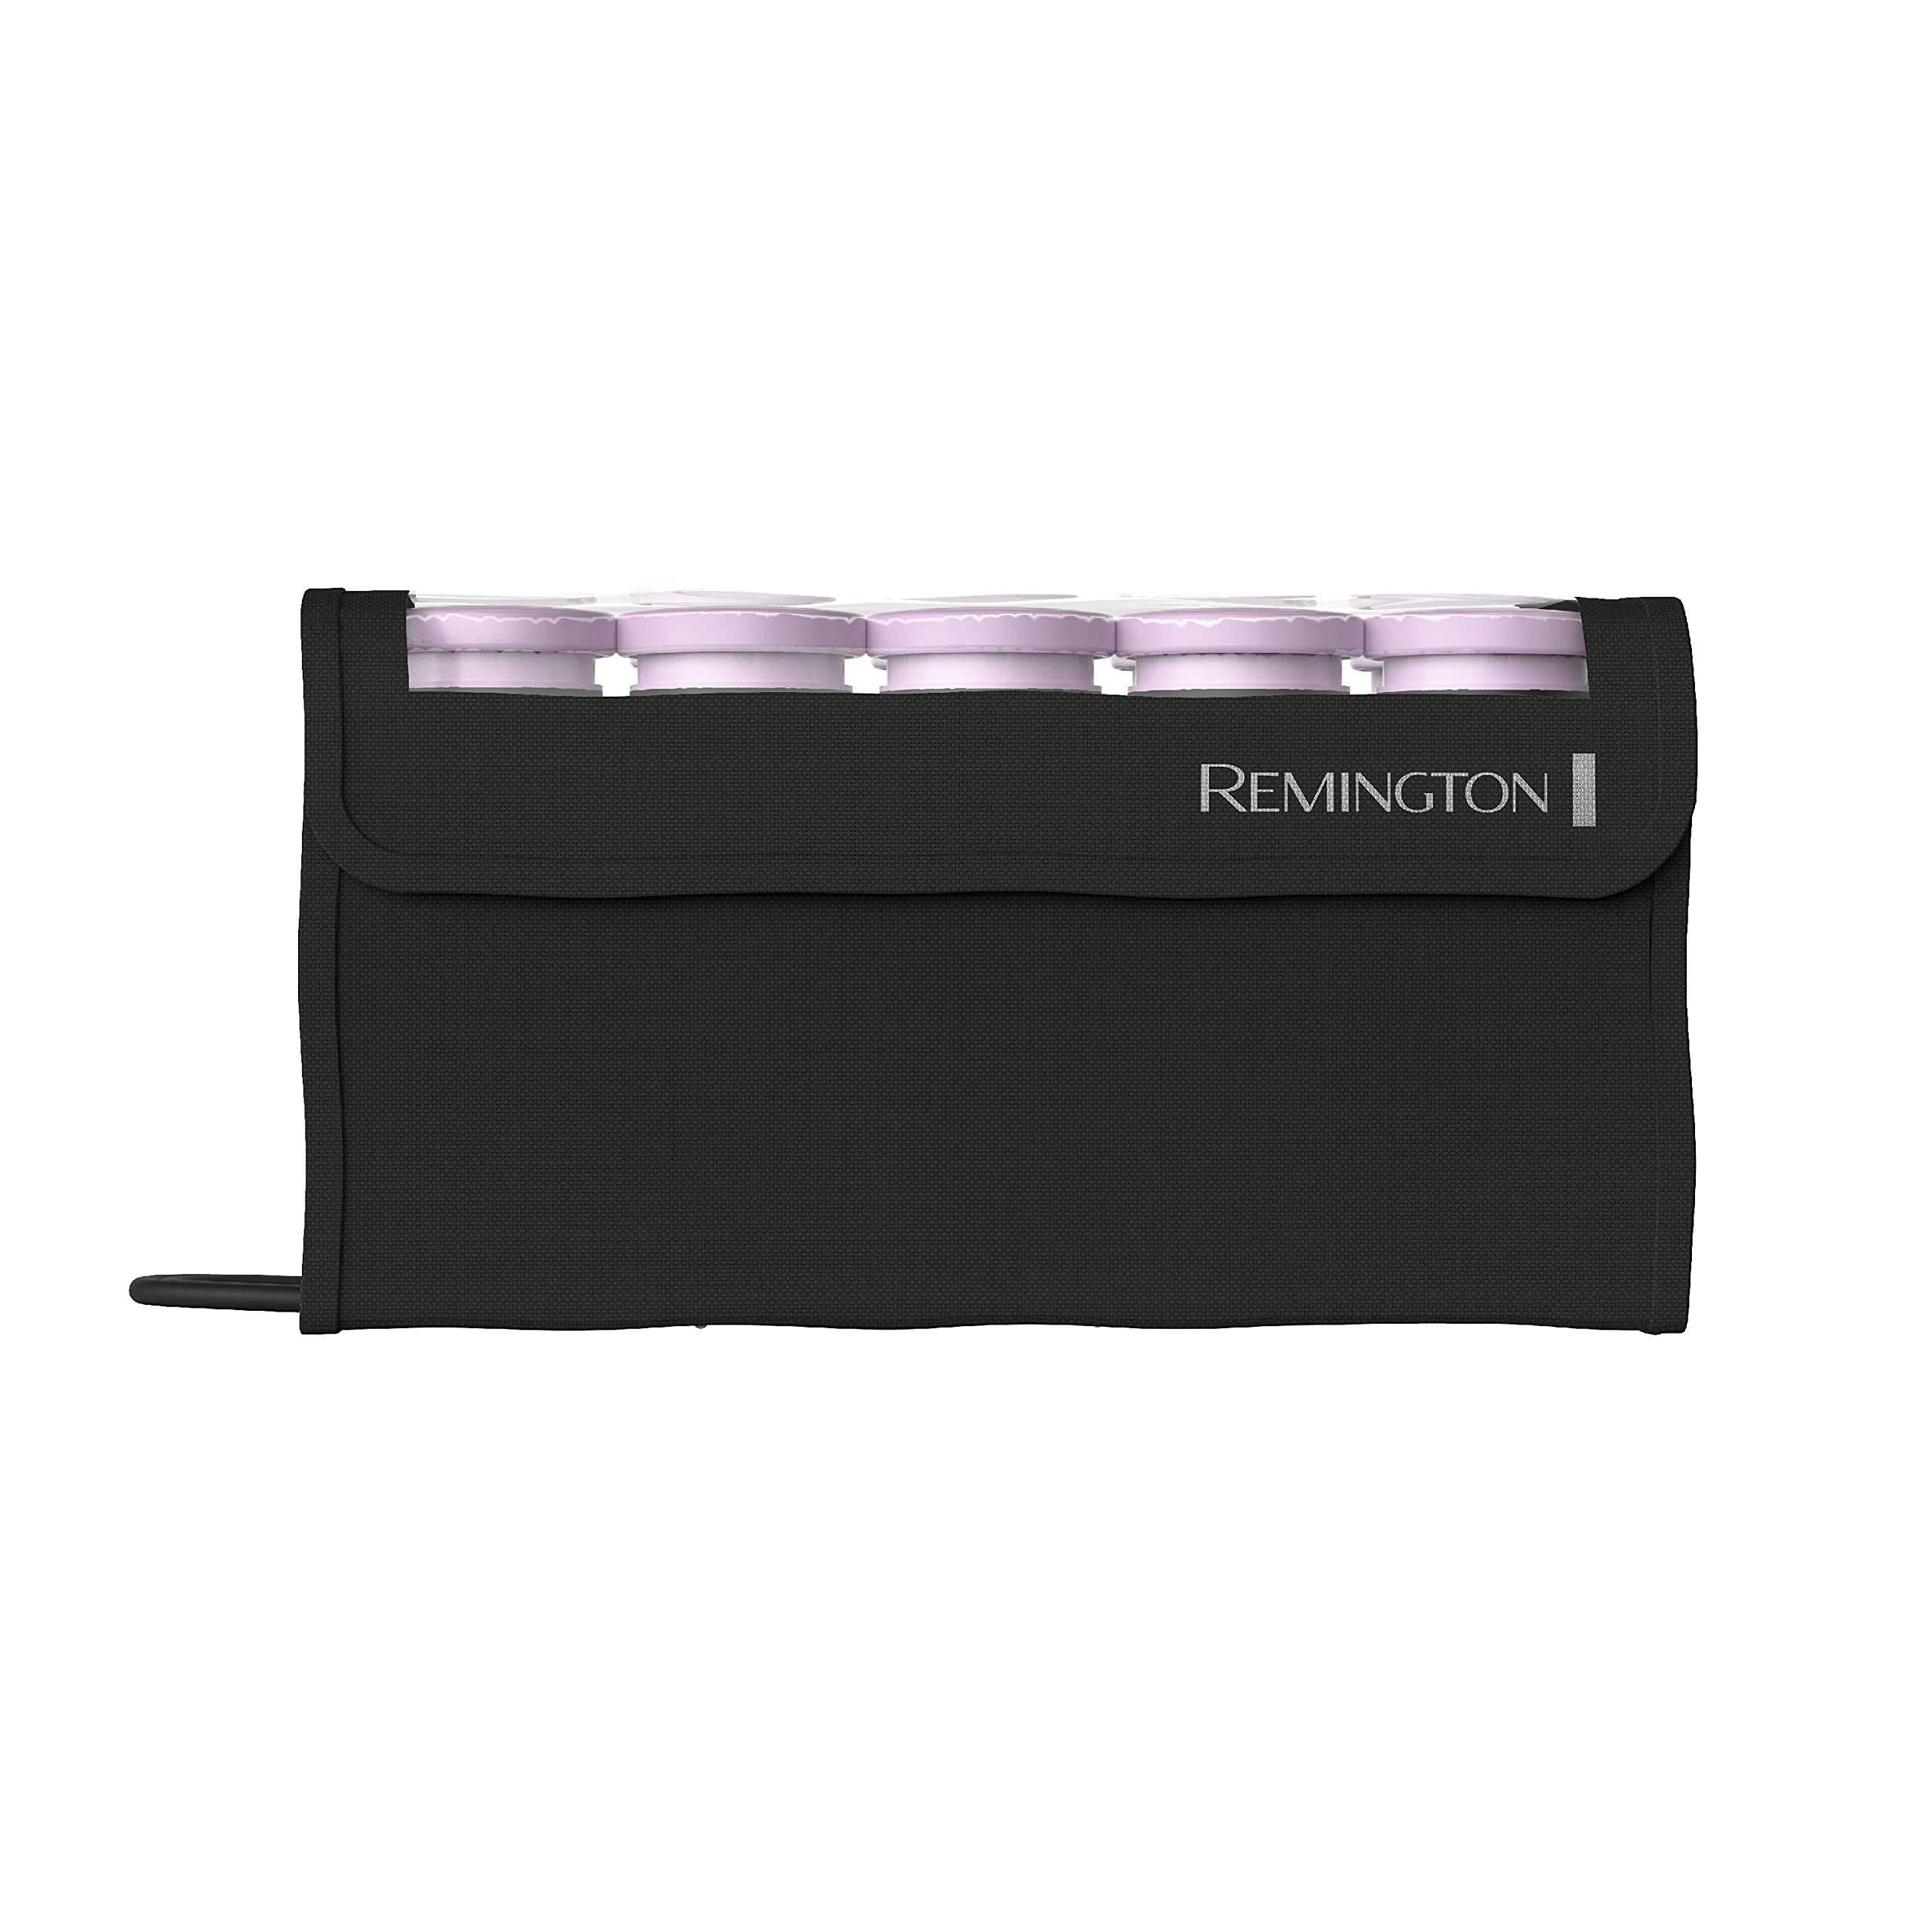 Remington H1015 Compact Ceramic Worldwide Voltage Hair Setter & Rollers, 1-1 ¼